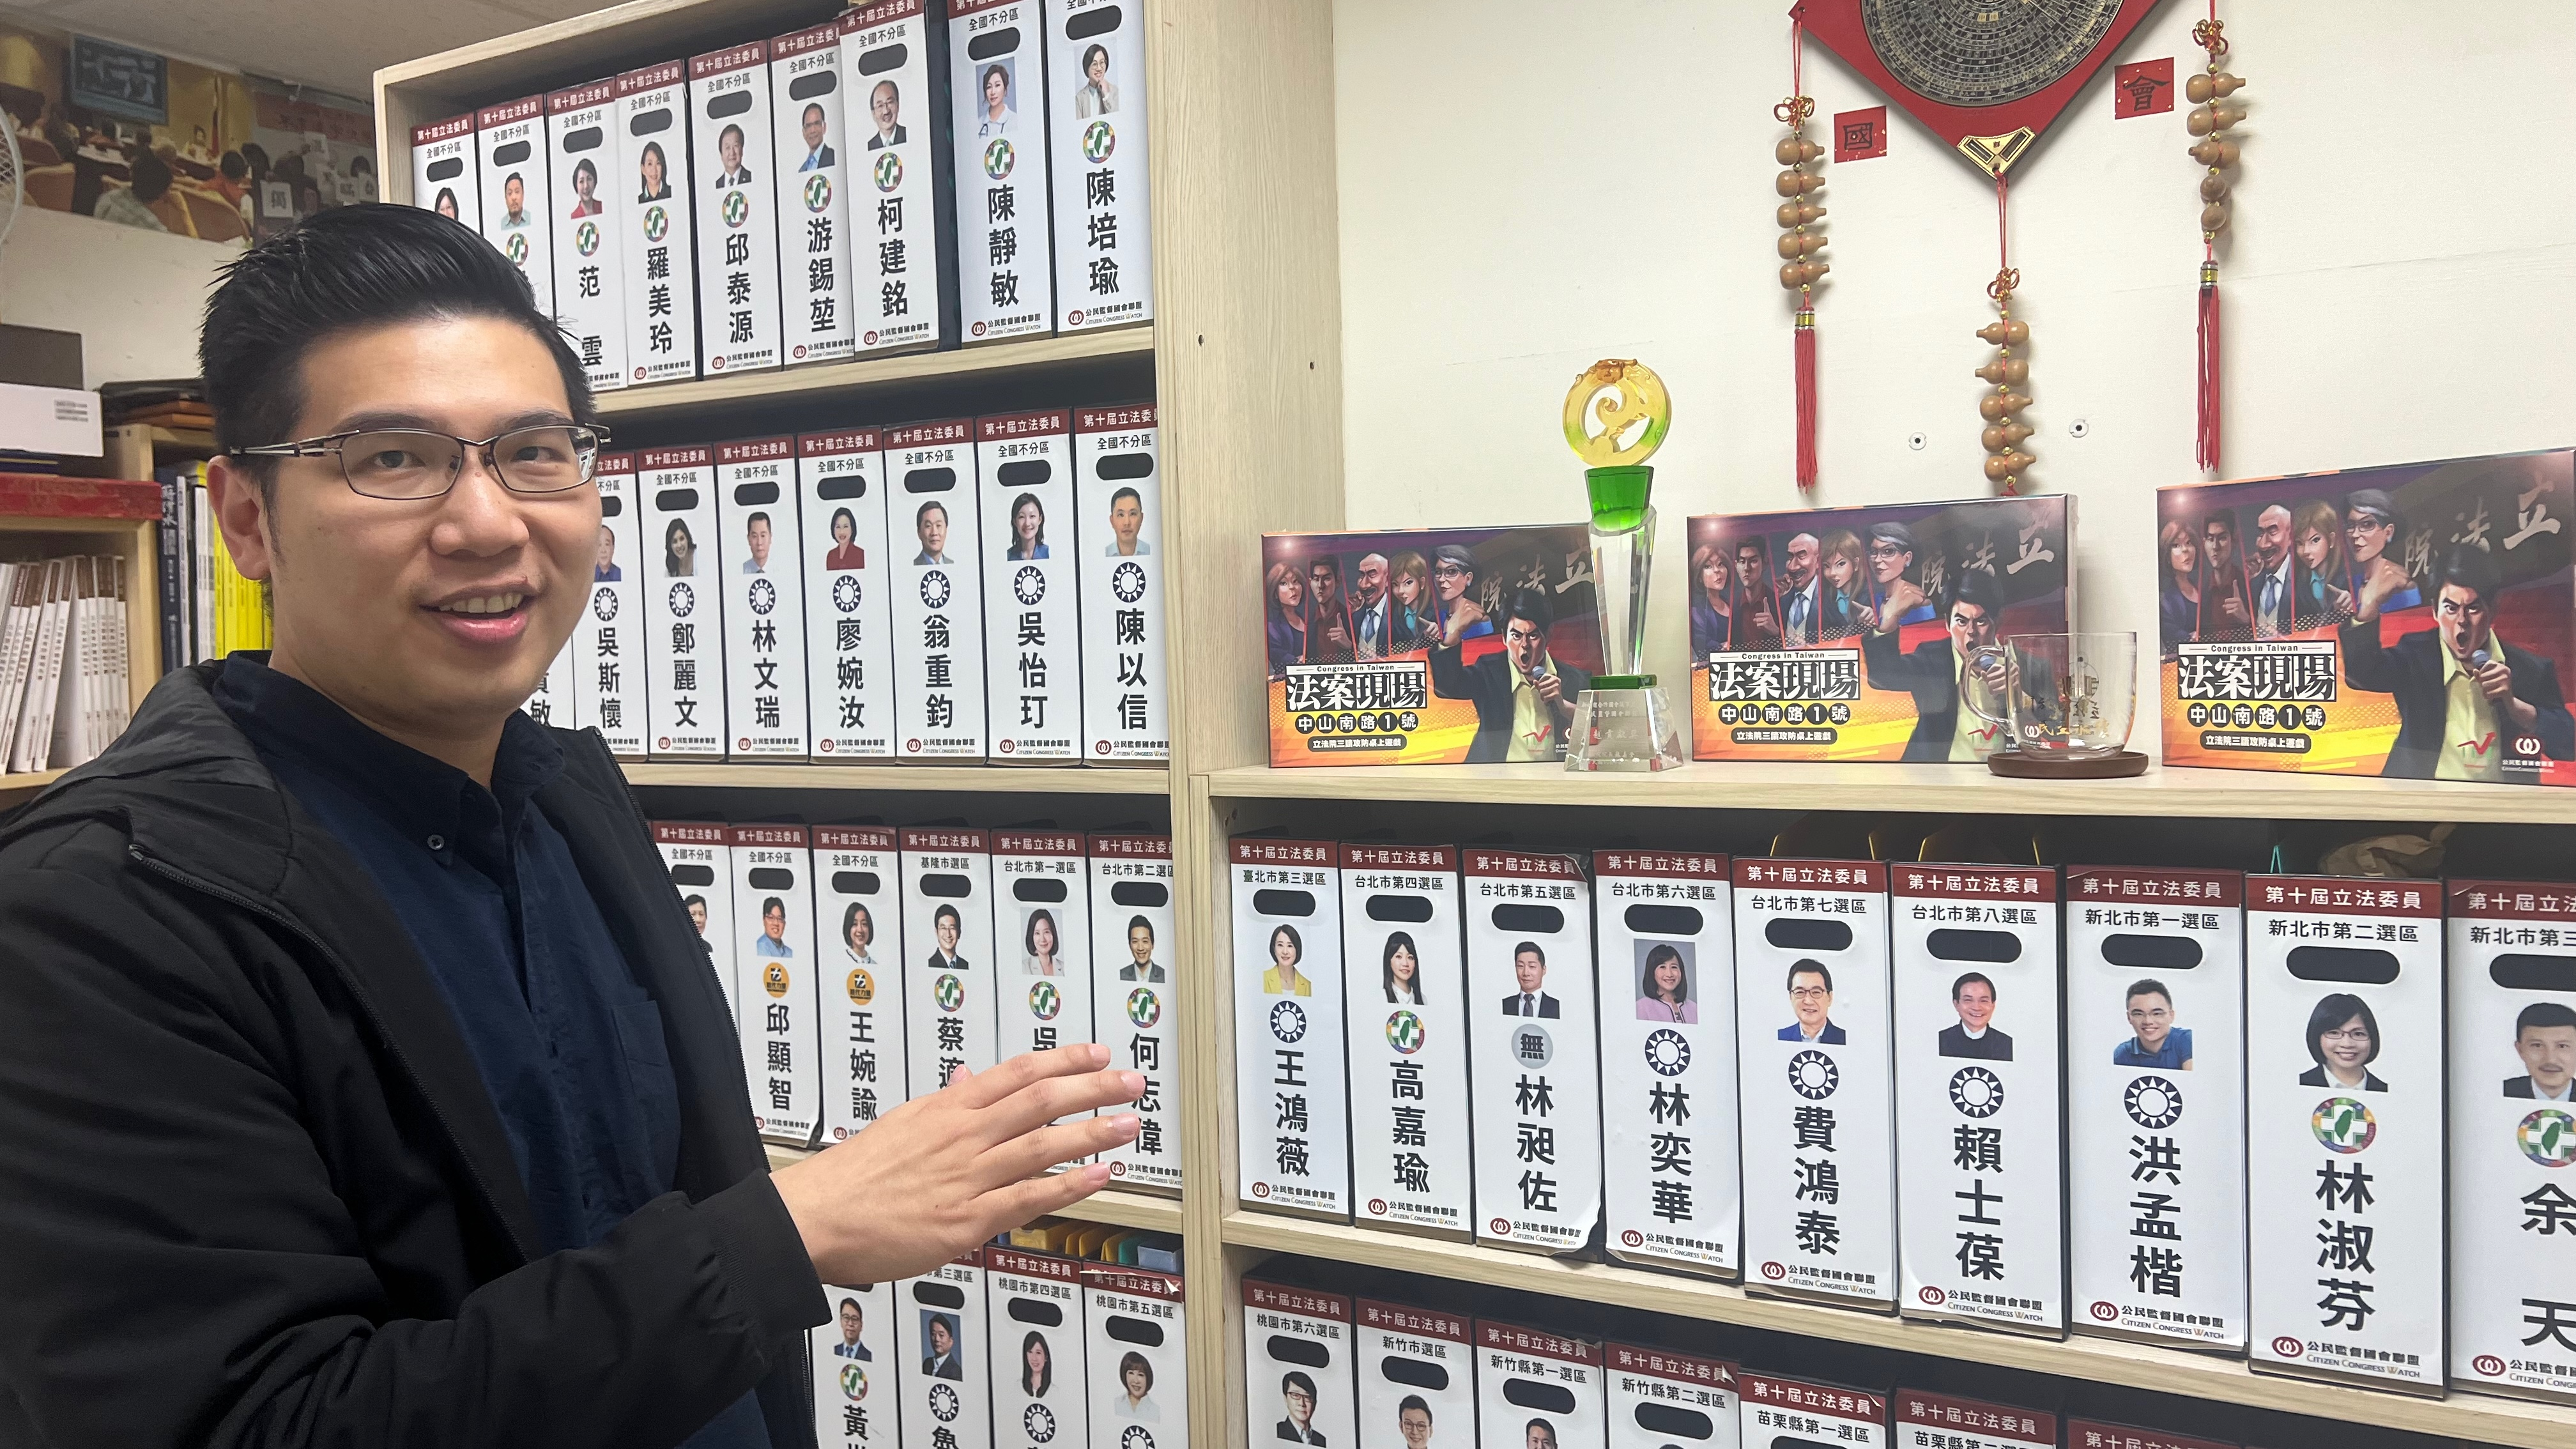 James Kan, Vice President of the organisation 'Citizens Congress Watch' in front of a bookcase with the files of selected candidates and elected politicians.